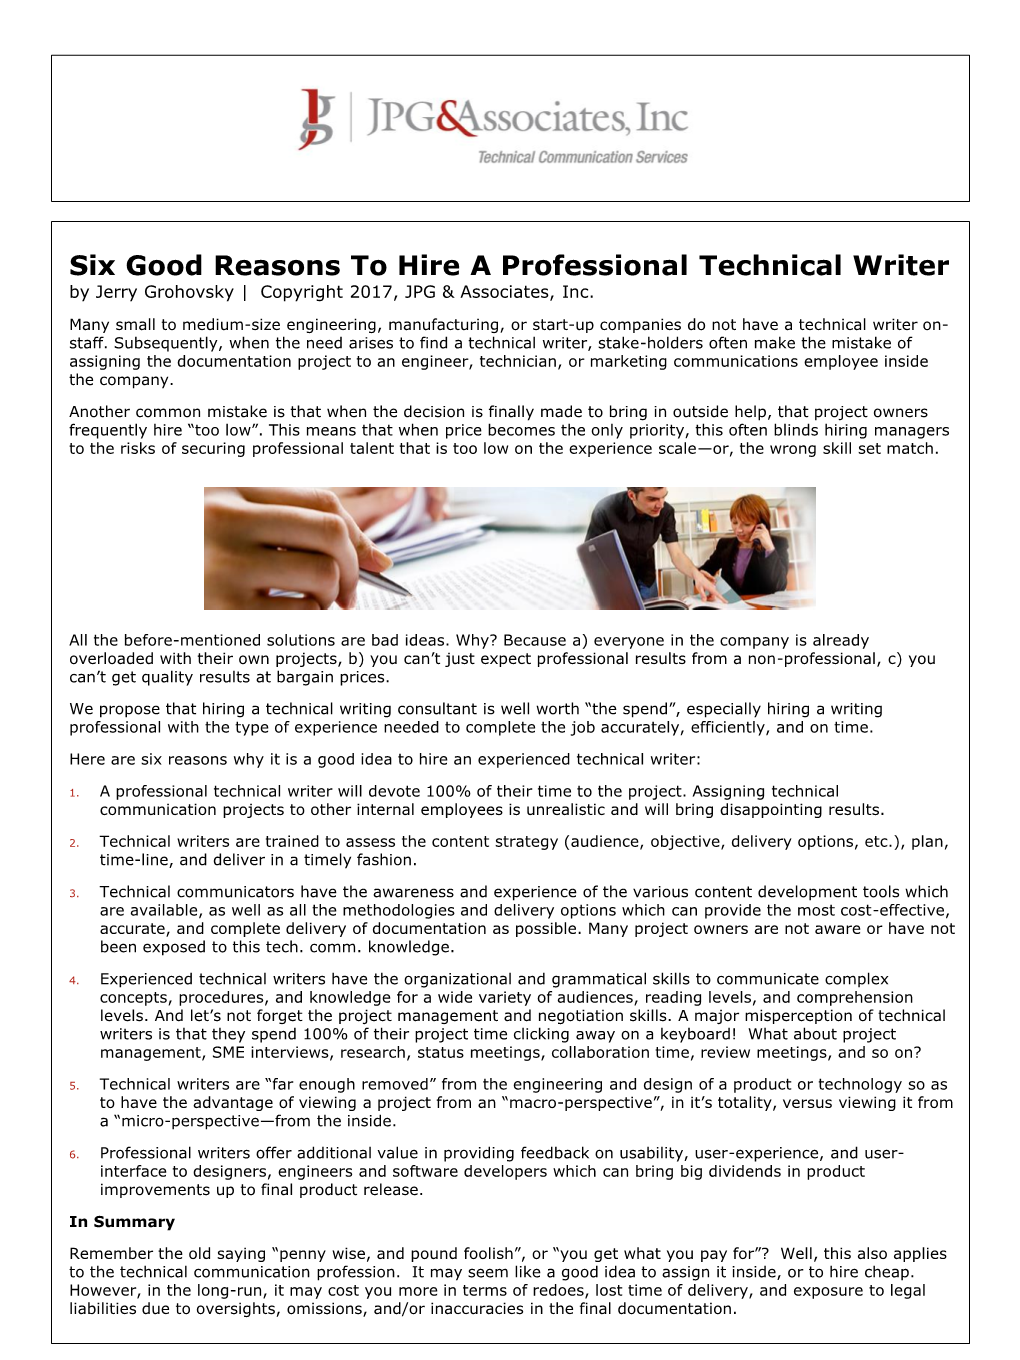 Six Good Reasons to Hire a Professional Technical Writer by Jerry Grohovsky | Copyright 2017, JPG & Associates, Inc